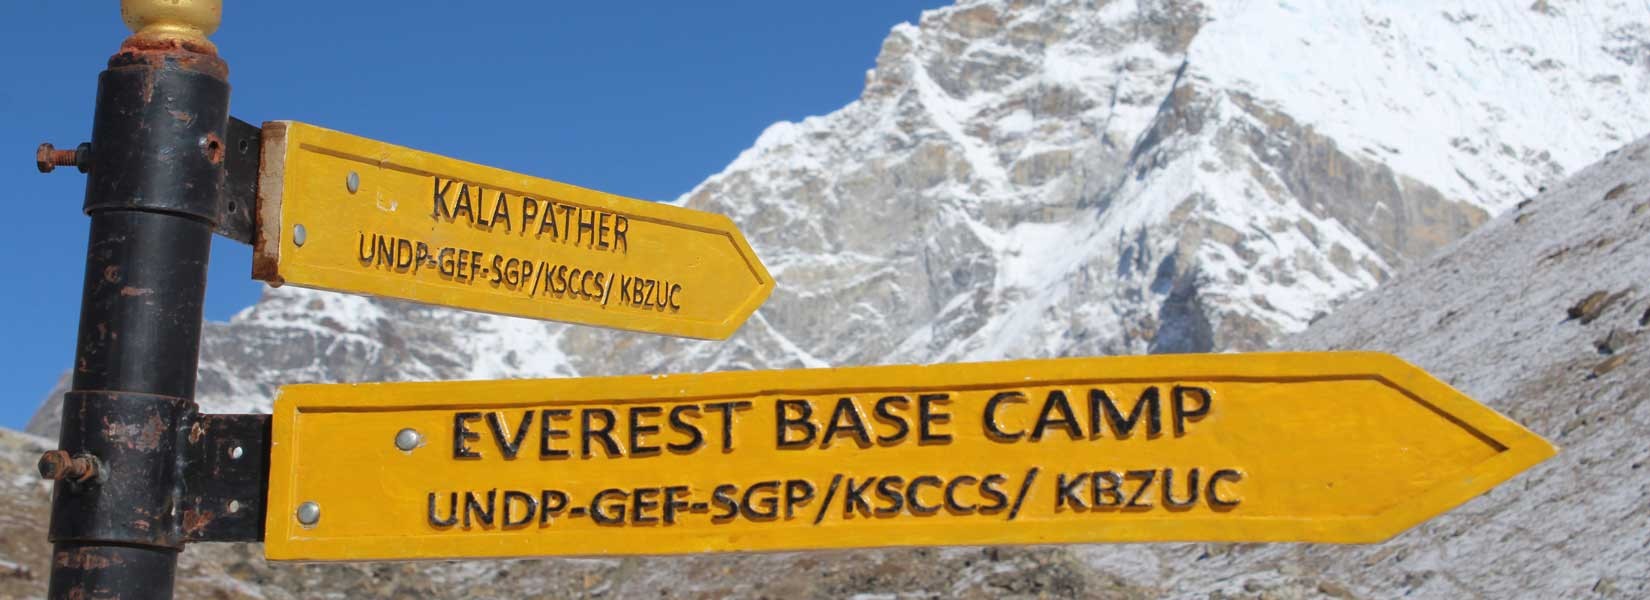 popular trek and tour packages to reach everest base camp